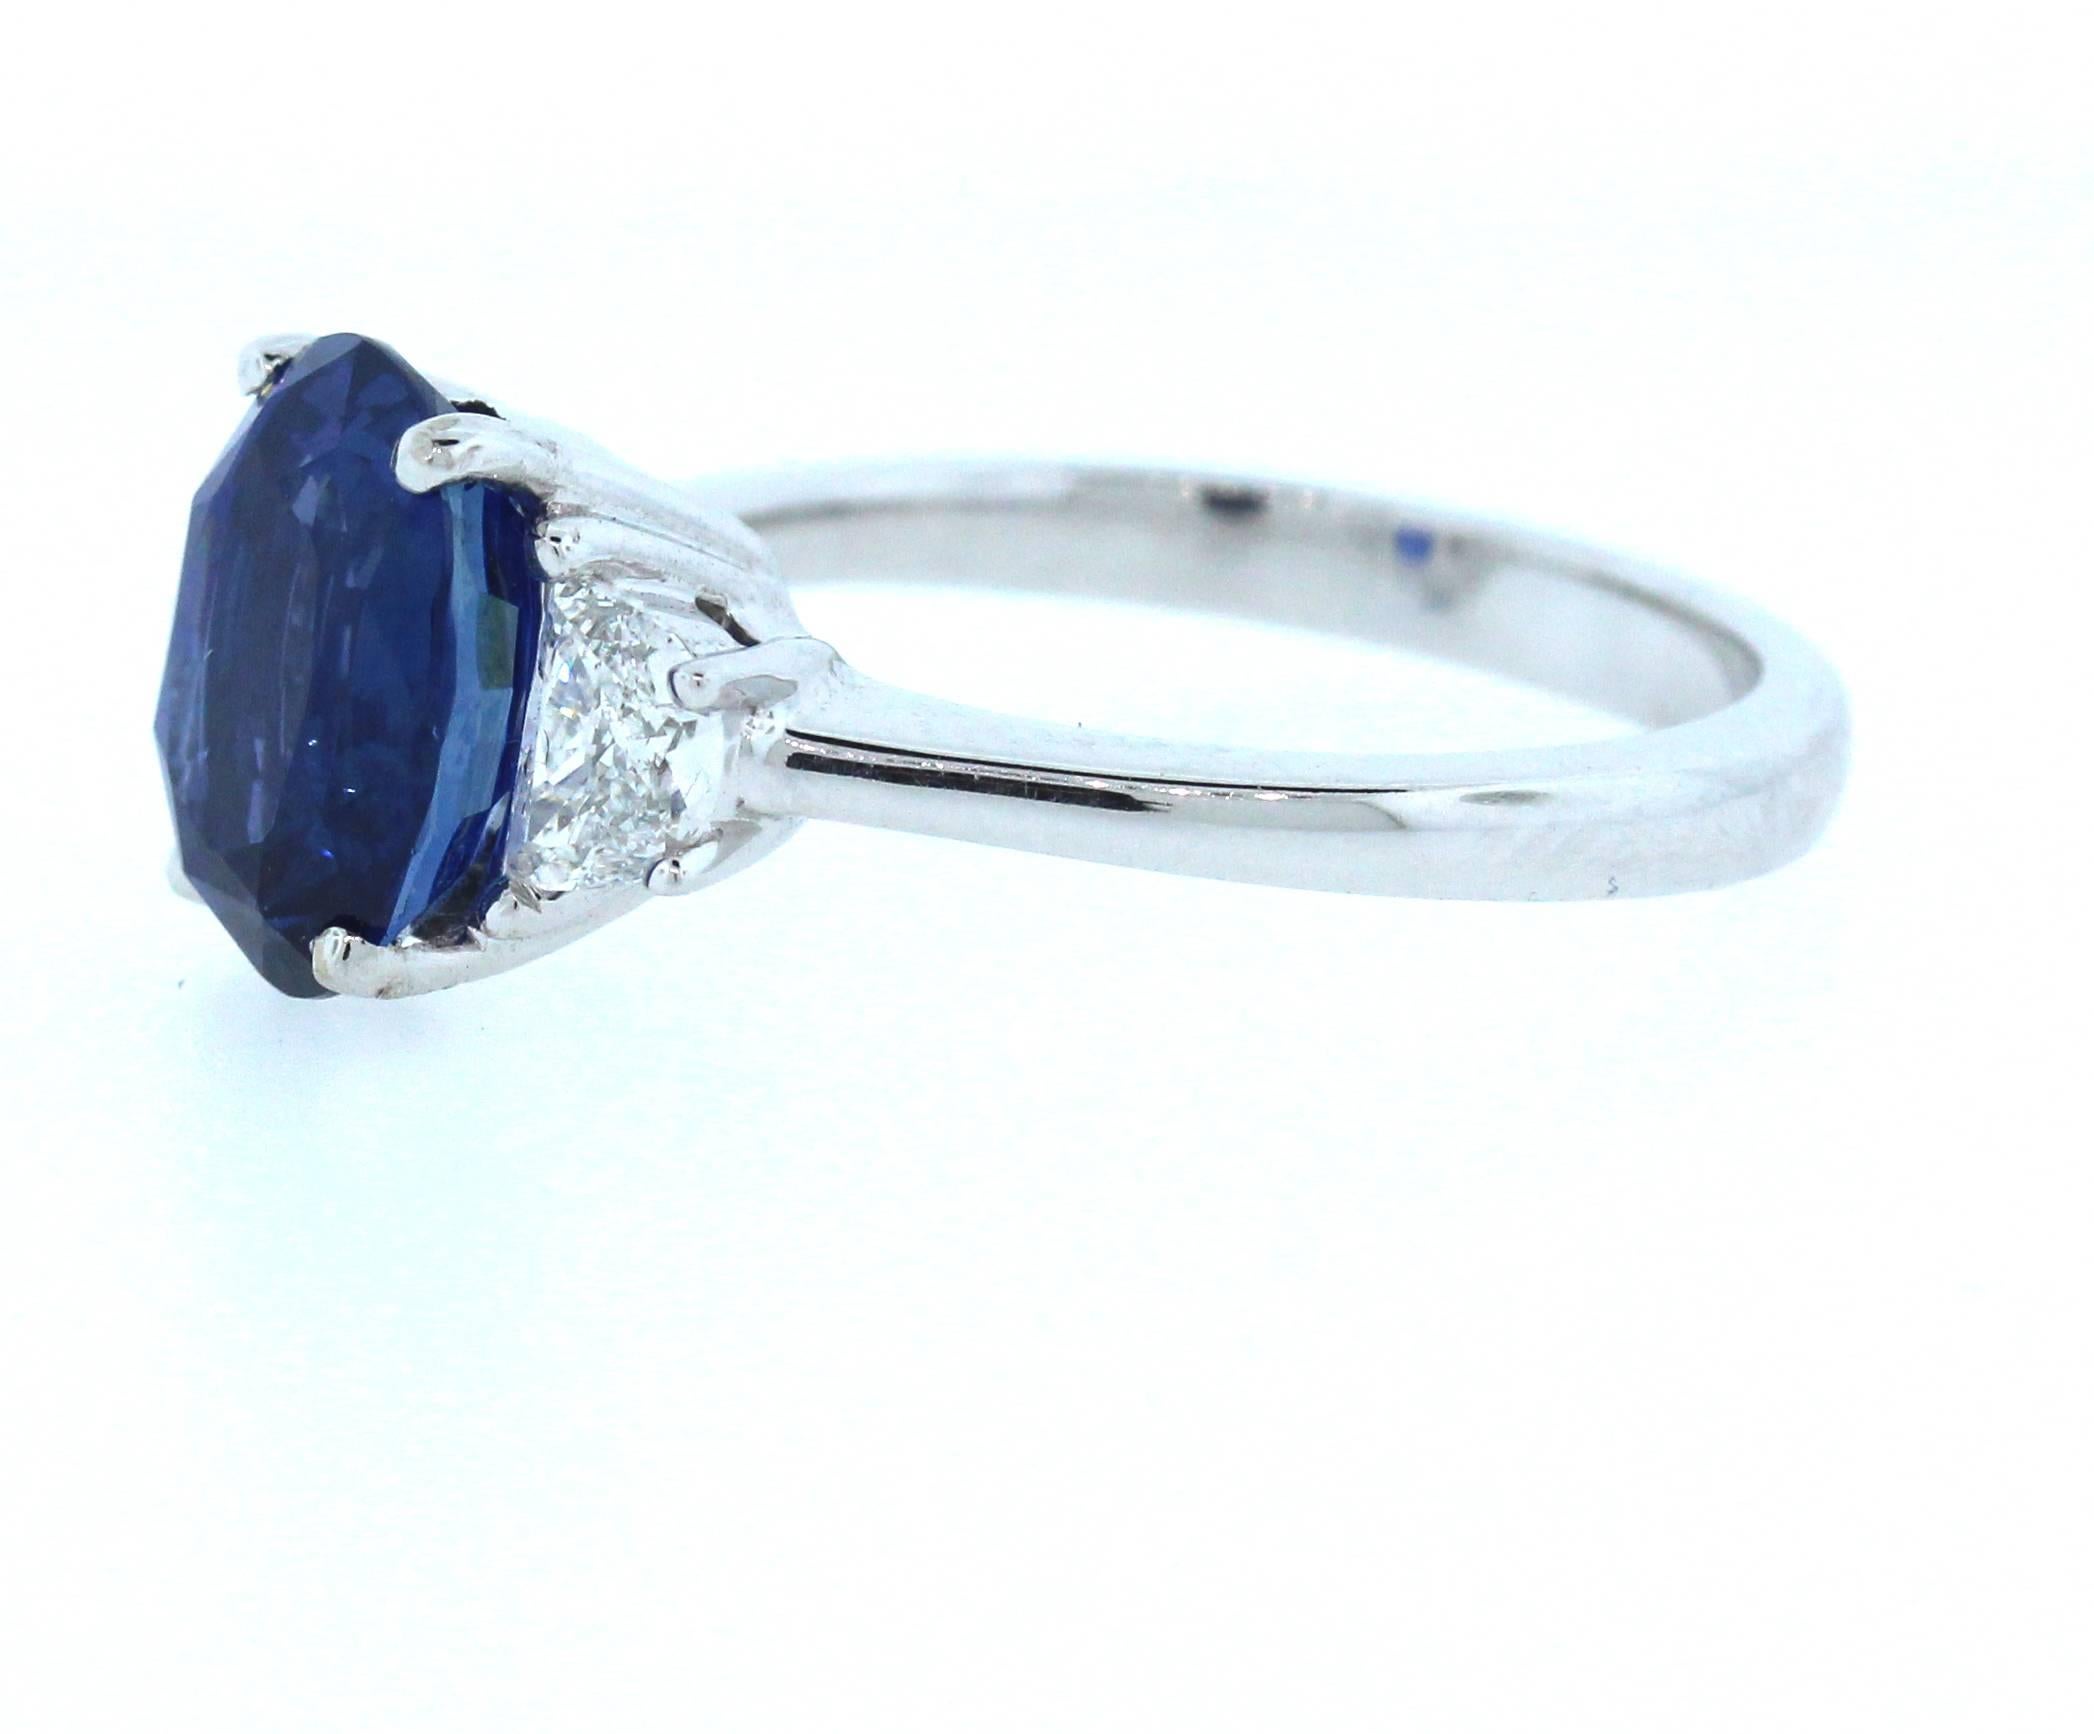 AGL Certified Ceylon Blue Sapphire with Two Trapezoid Diamonds 

Ring is done in 18K White Gold

Blue Sapphire is 4.00 carat. Oval shape. From Ceylon (Sri Lanka). 
NO Heat all natural color.

Certification states: "non-heated sapphires are